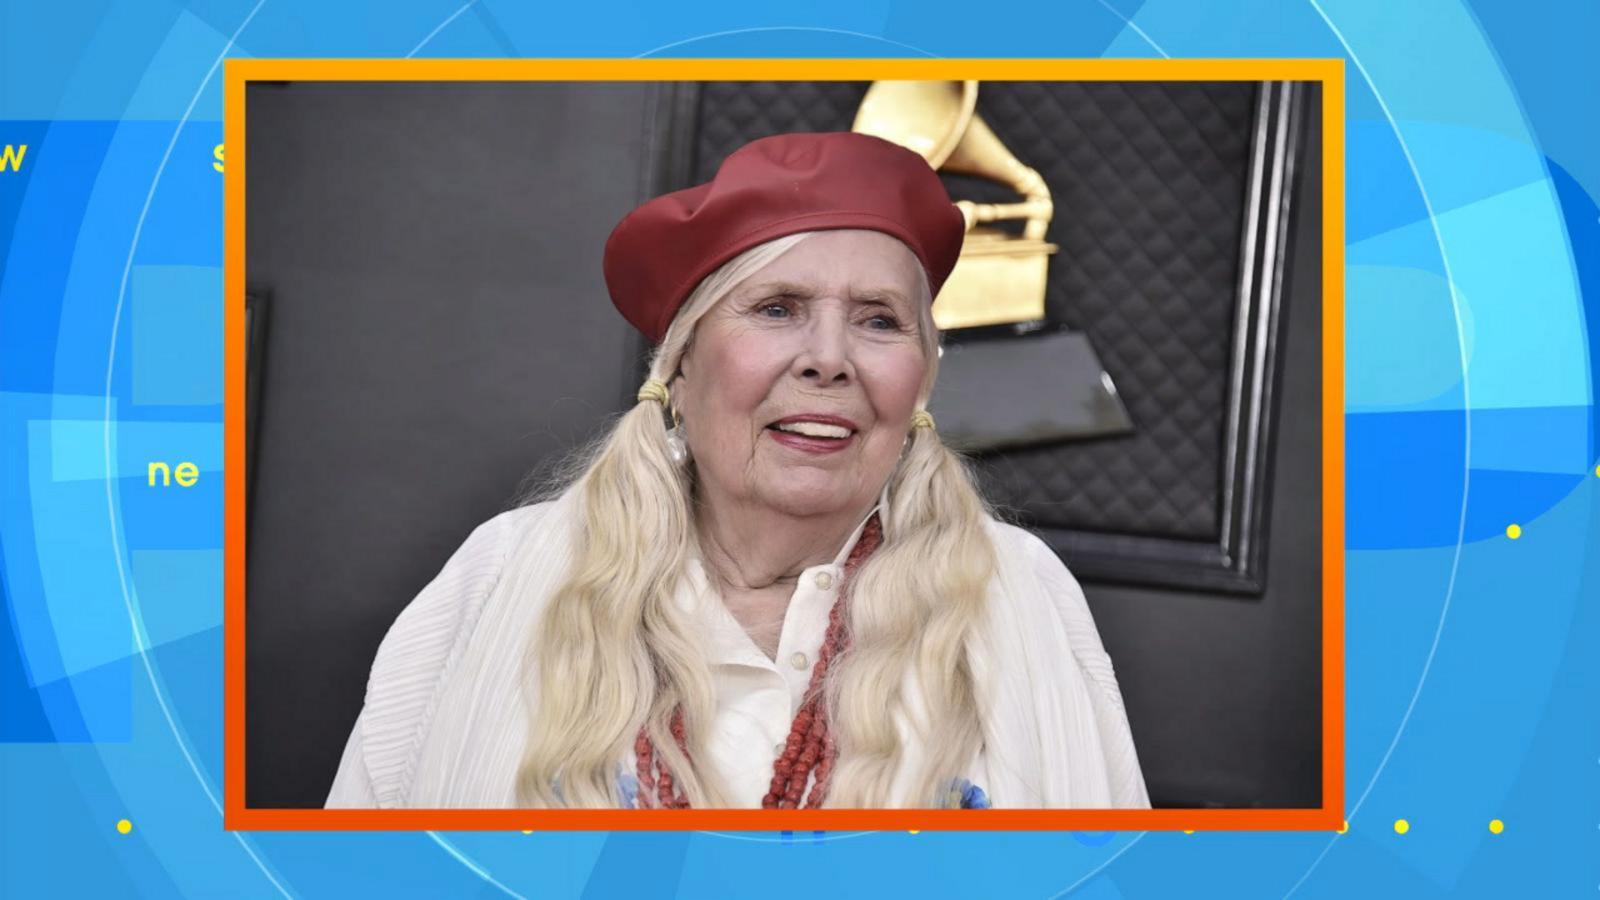 VIDEO: Joni Mitchell to perform at Grammys for 1st time